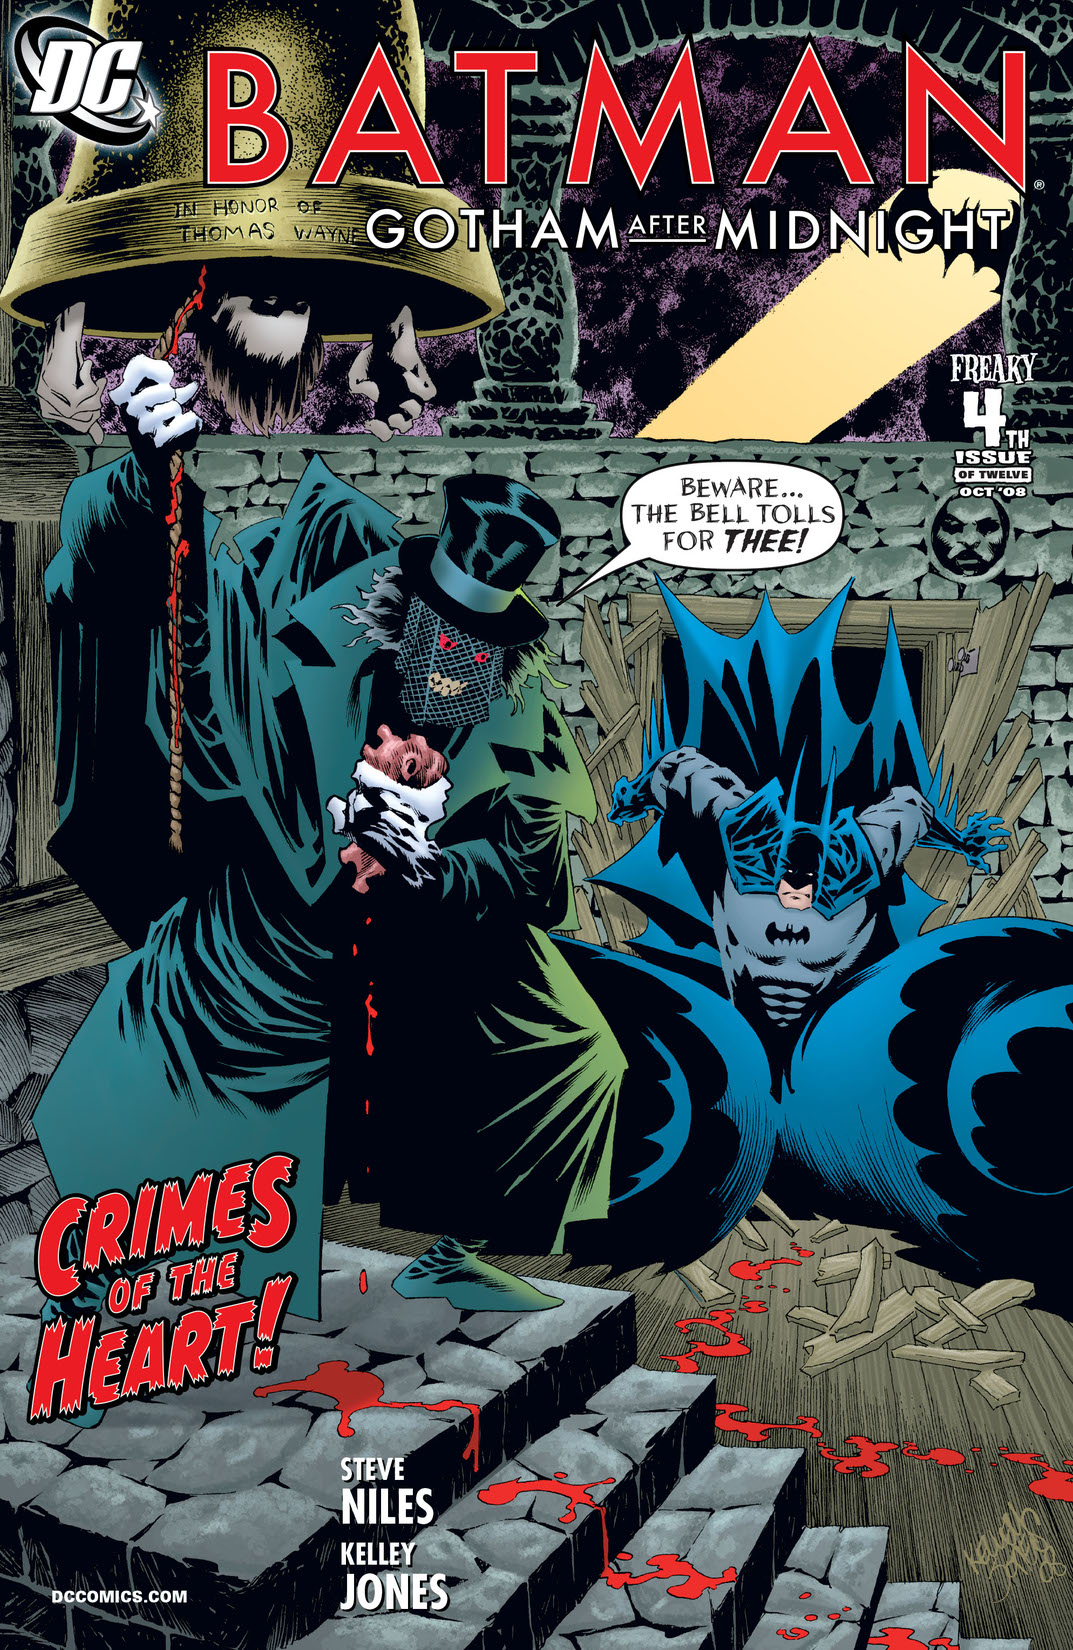 Batman: Gotham After Midnight #4 preview images